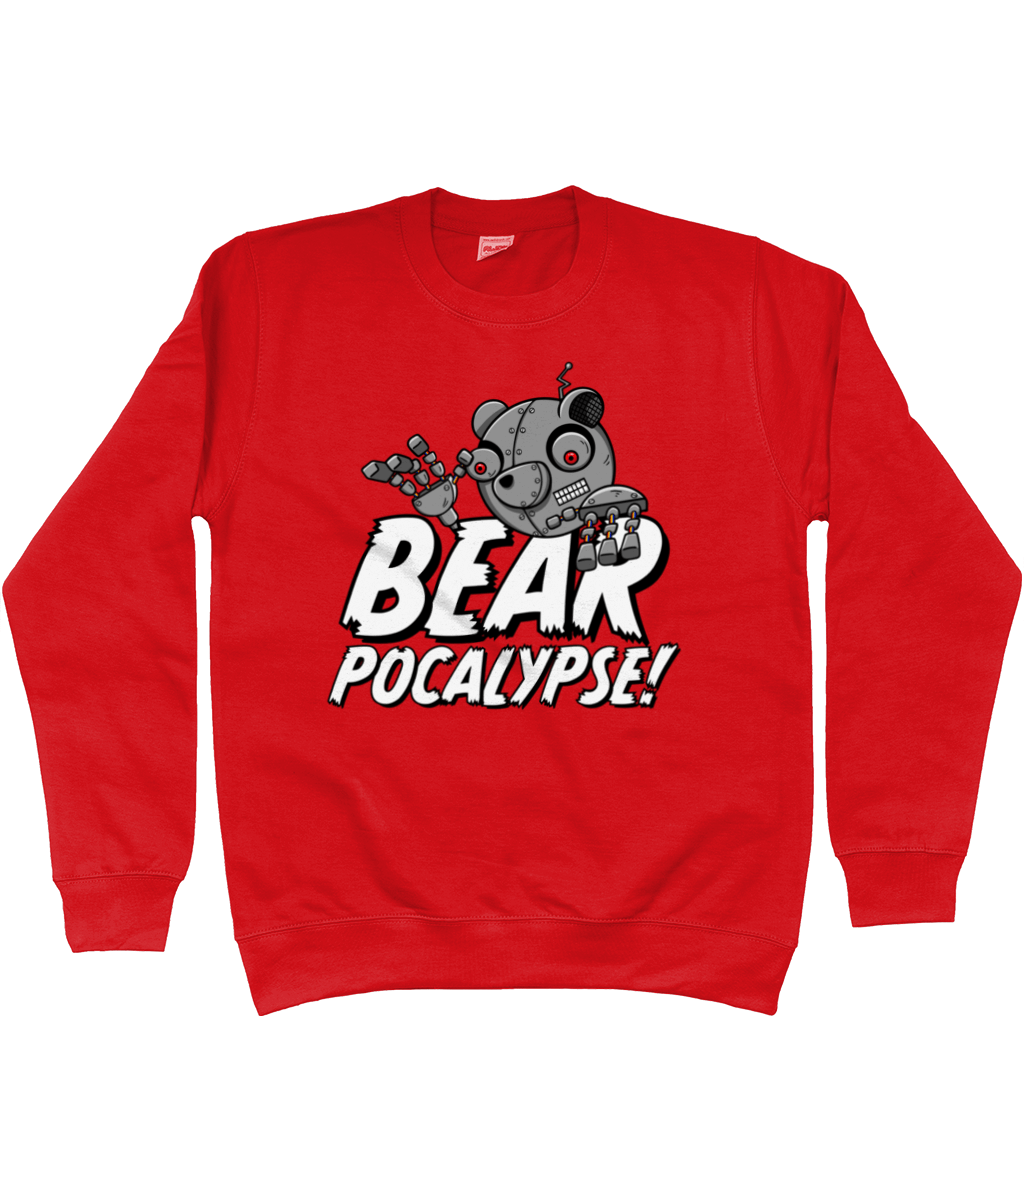 Red sweatshirt with white bold text reading Bearpocalypse! with a robot bear climbing over it.